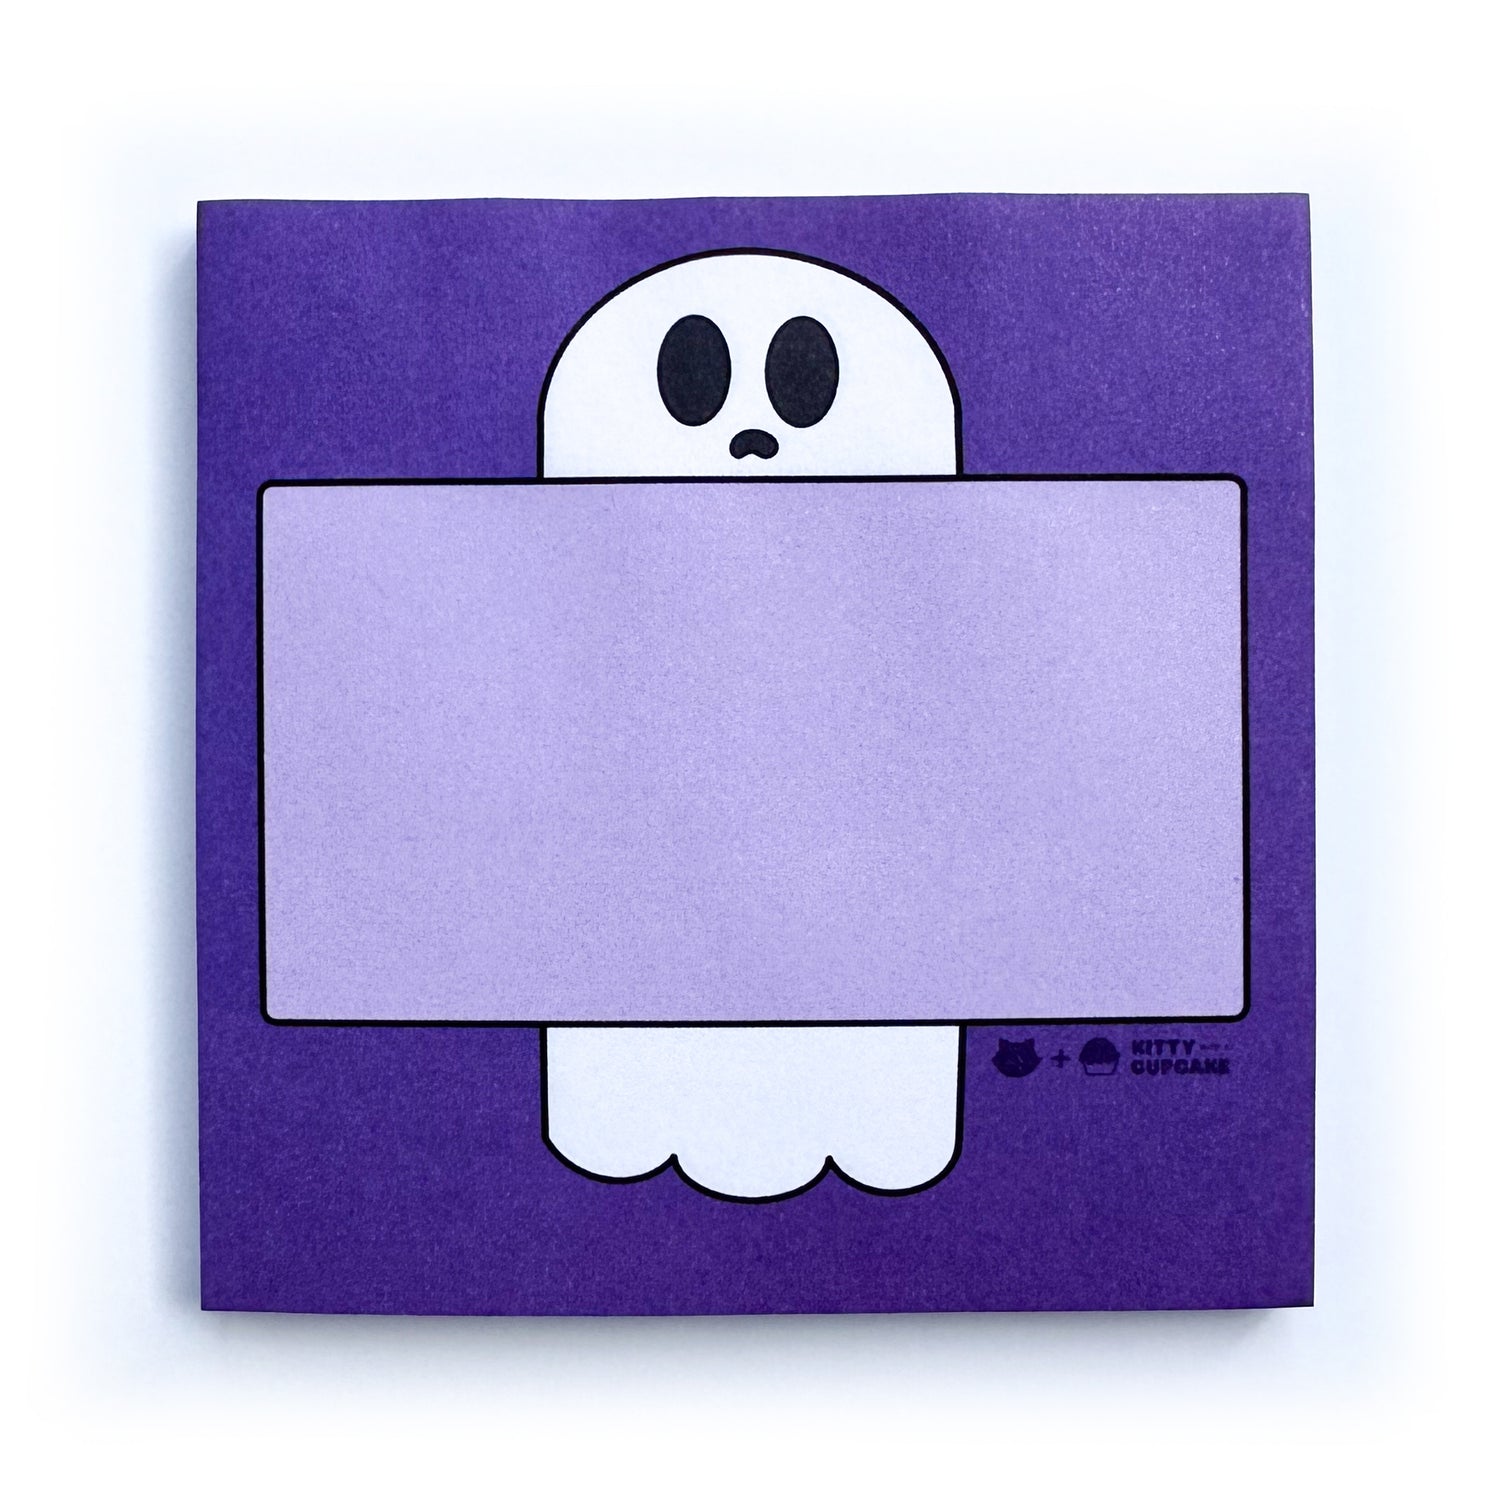 A purple square pad of sticky notes featuring a ghost holding a light purple box to write in.